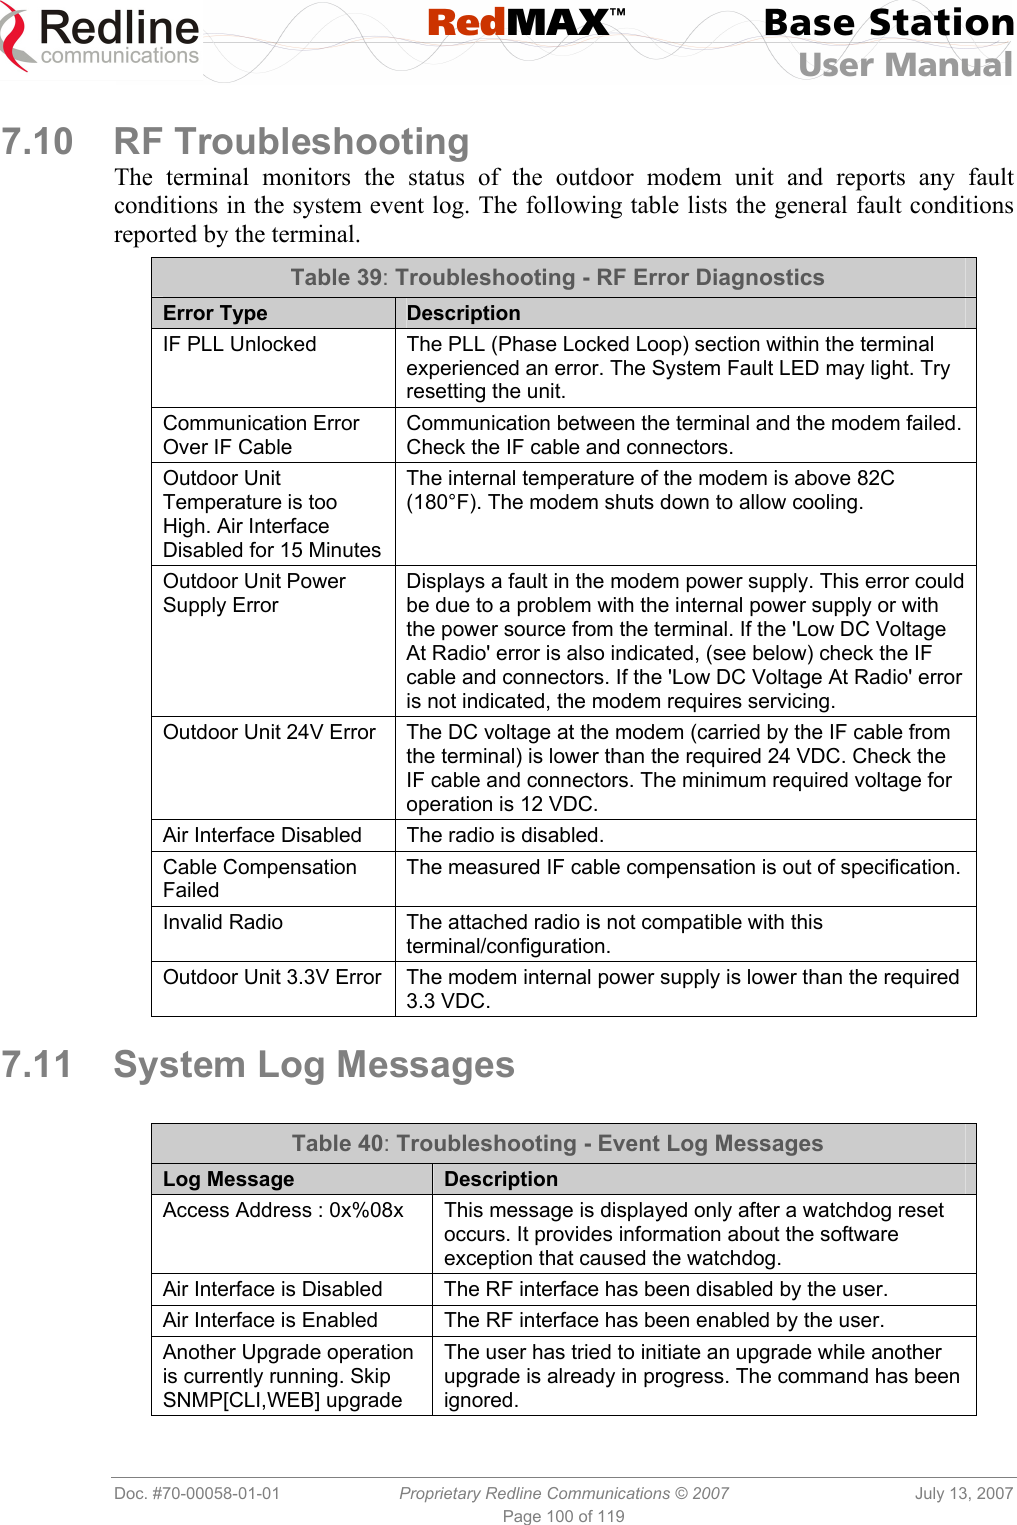  RedMAX™ Base Station User Manual   Doc. #70-00058-01-01  Proprietary Redline Communications © 2007  July 13, 2007 Page 100 of 119  7.10 RF Troubleshooting The terminal monitors the status of the outdoor modem unit and reports any fault conditions in the system event log. The following table lists the general fault conditions reported by the terminal. Table 39: Troubleshooting - RF Error Diagnostics Error Type  Description IF PLL Unlocked  The PLL (Phase Locked Loop) section within the terminal experienced an error. The System Fault LED may light. Try resetting the unit. Communication Error Over IF Cable Communication between the terminal and the modem failed. Check the IF cable and connectors. Outdoor Unit Temperature is too High. Air Interface Disabled for 15 Minutes The internal temperature of the modem is above 82C (180°F). The modem shuts down to allow cooling. Outdoor Unit Power Supply Error Displays a fault in the modem power supply. This error could be due to a problem with the internal power supply or with the power source from the terminal. If the &apos;Low DC Voltage At Radio&apos; error is also indicated, (see below) check the IF cable and connectors. If the &apos;Low DC Voltage At Radio&apos; error is not indicated, the modem requires servicing. Outdoor Unit 24V Error  The DC voltage at the modem (carried by the IF cable from the terminal) is lower than the required 24 VDC. Check the IF cable and connectors. The minimum required voltage for operation is 12 VDC. Air Interface Disabled  The radio is disabled. Cable Compensation Failed The measured IF cable compensation is out of specification. Invalid Radio  The attached radio is not compatible with this terminal/configuration. Outdoor Unit 3.3V Error  The modem internal power supply is lower than the required 3.3 VDC.    7.11 System Log Messages  Table 40: Troubleshooting - Event Log Messages Log Message  Description Access Address : 0x%08x  This message is displayed only after a watchdog reset occurs. It provides information about the software exception that caused the watchdog. Air Interface is Disabled  The RF interface has been disabled by the user. Air Interface is Enabled  The RF interface has been enabled by the user. Another Upgrade operation is currently running. Skip SNMP[CLI,WEB] upgrade The user has tried to initiate an upgrade while another upgrade is already in progress. The command has been ignored. 